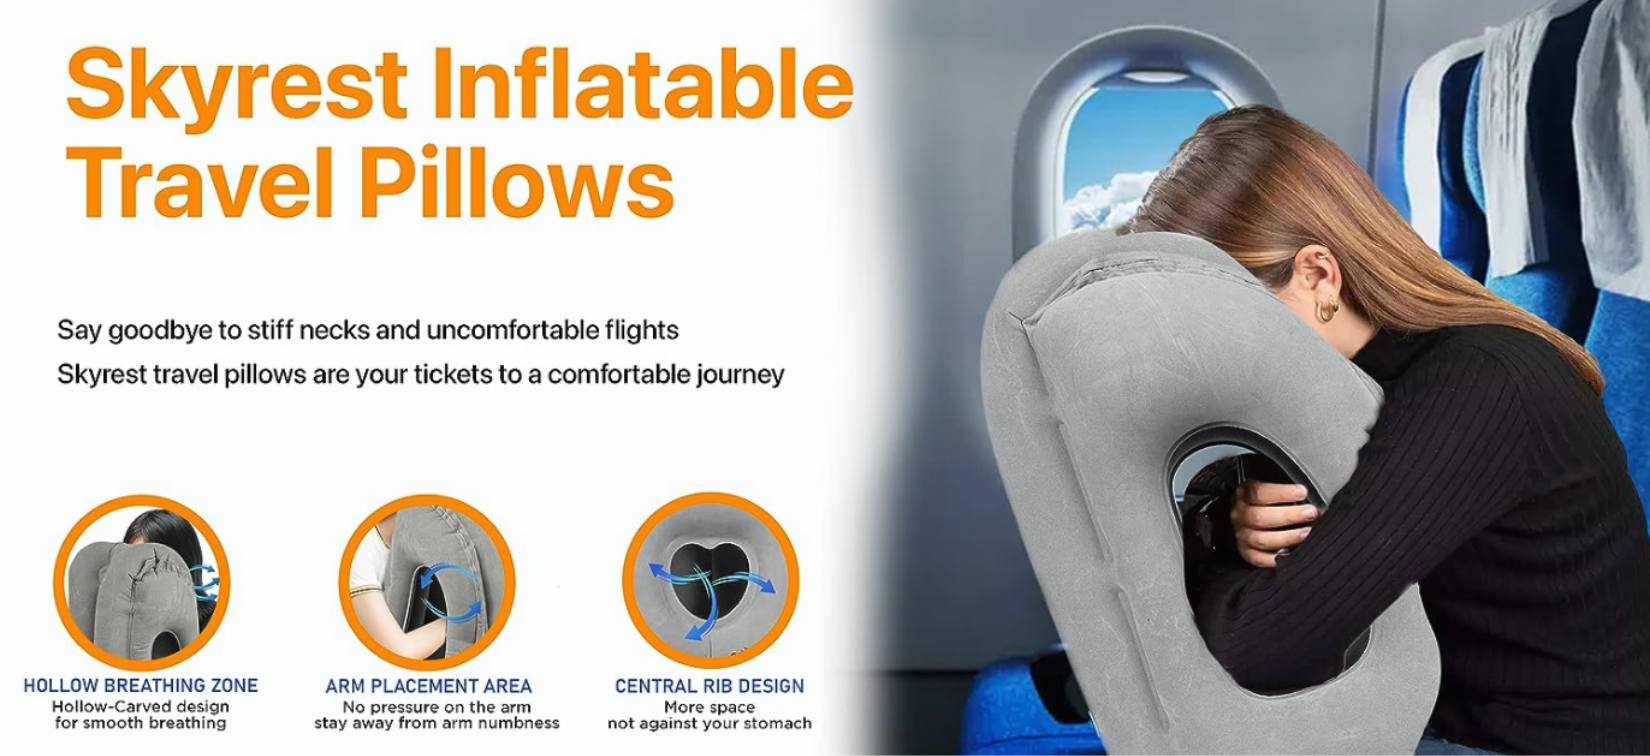 What are the benefits of an inflatable airplane pillow? – Skyrest